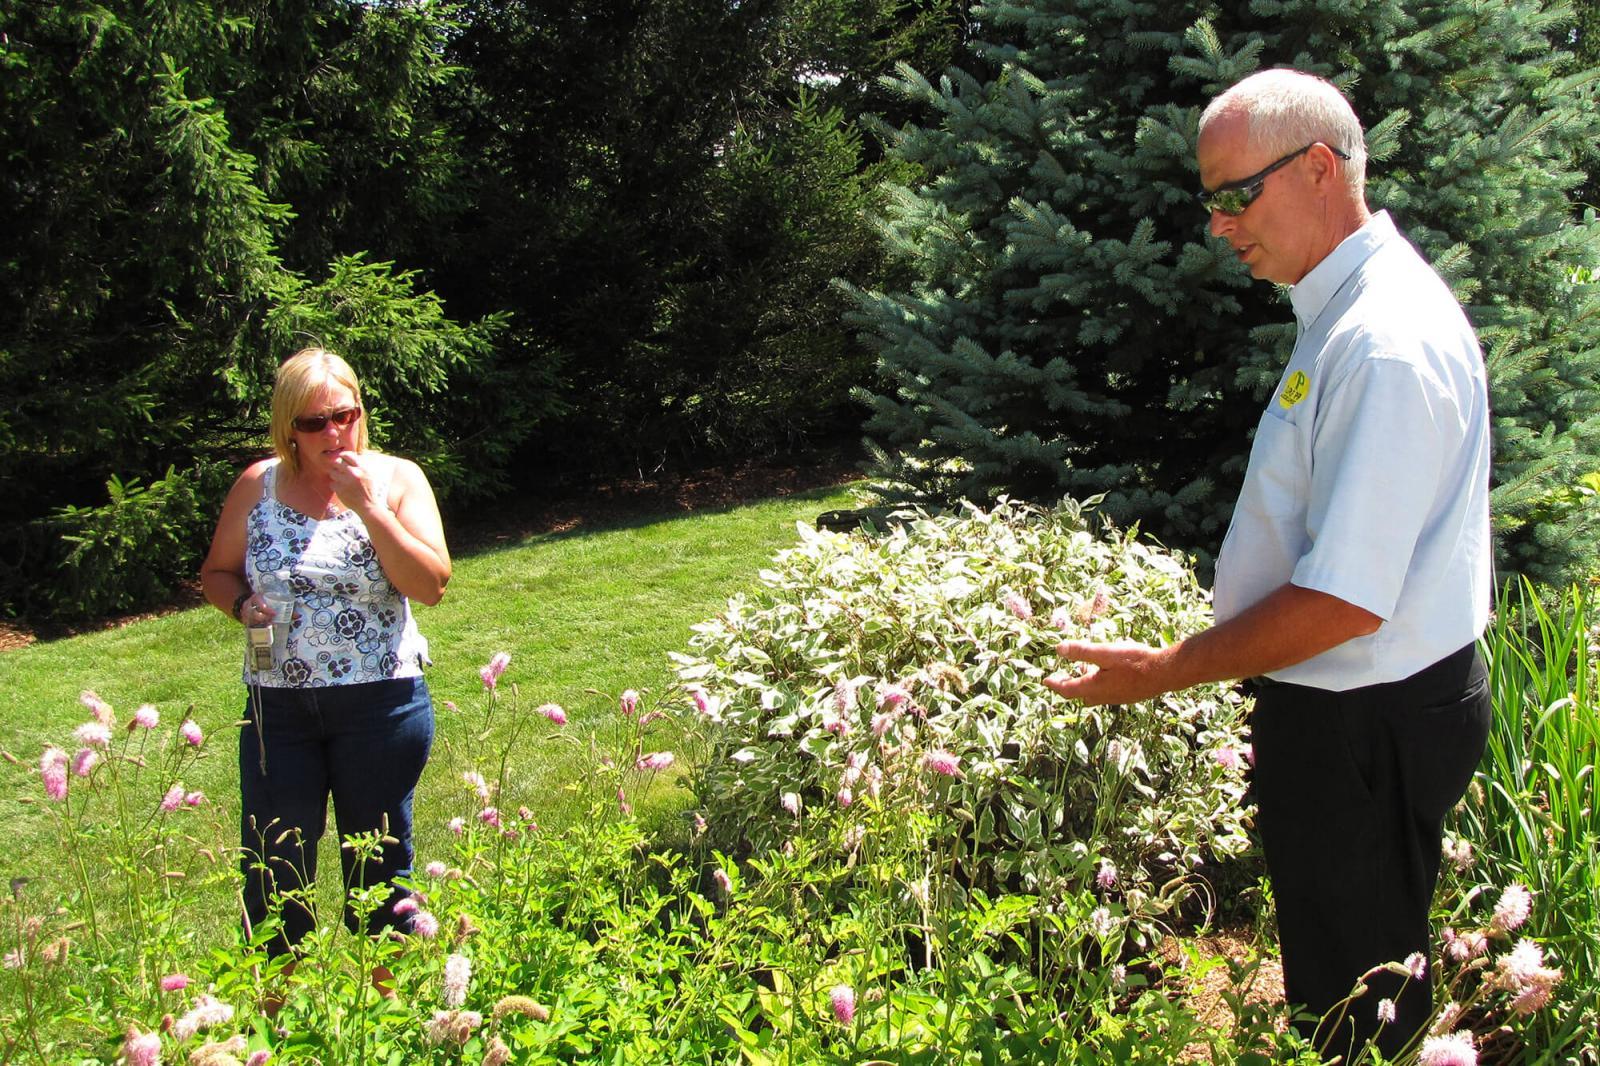 Gardens of Distinction meets with great success in second season